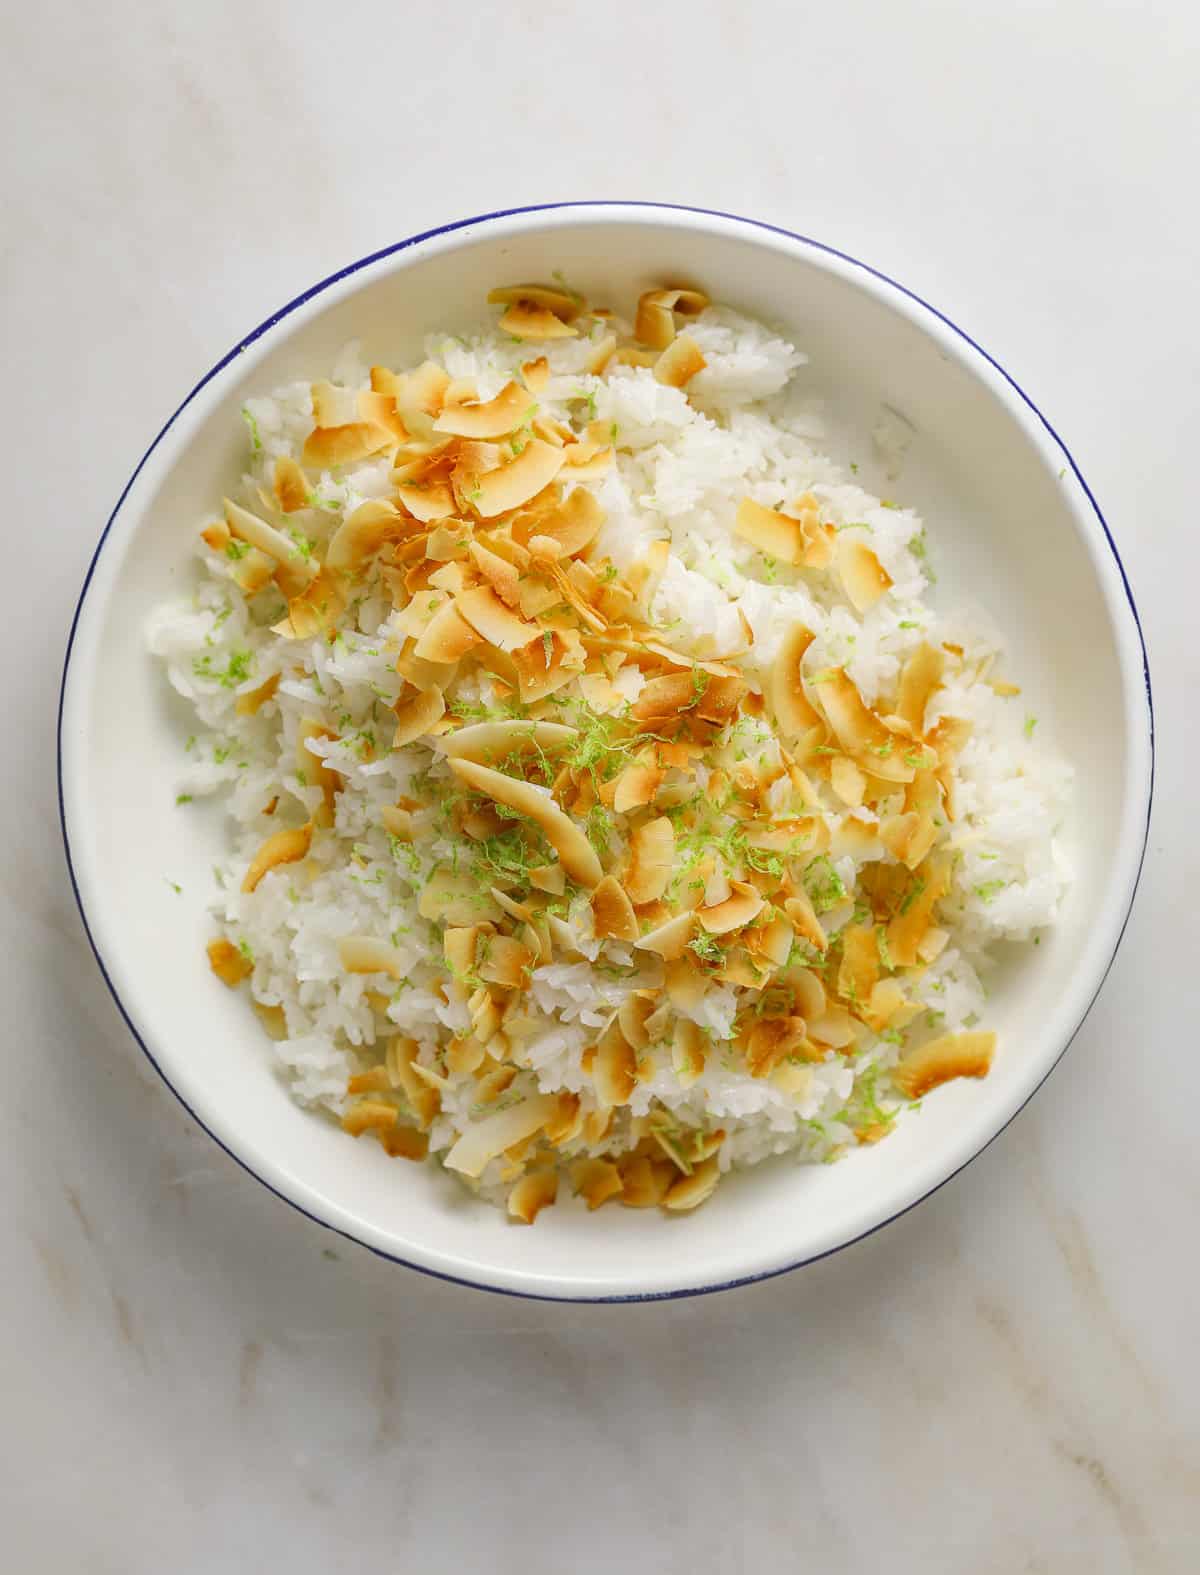 A white and blue enamel bowl filled with steamed rice, toasted coconut flakes and lime zest.